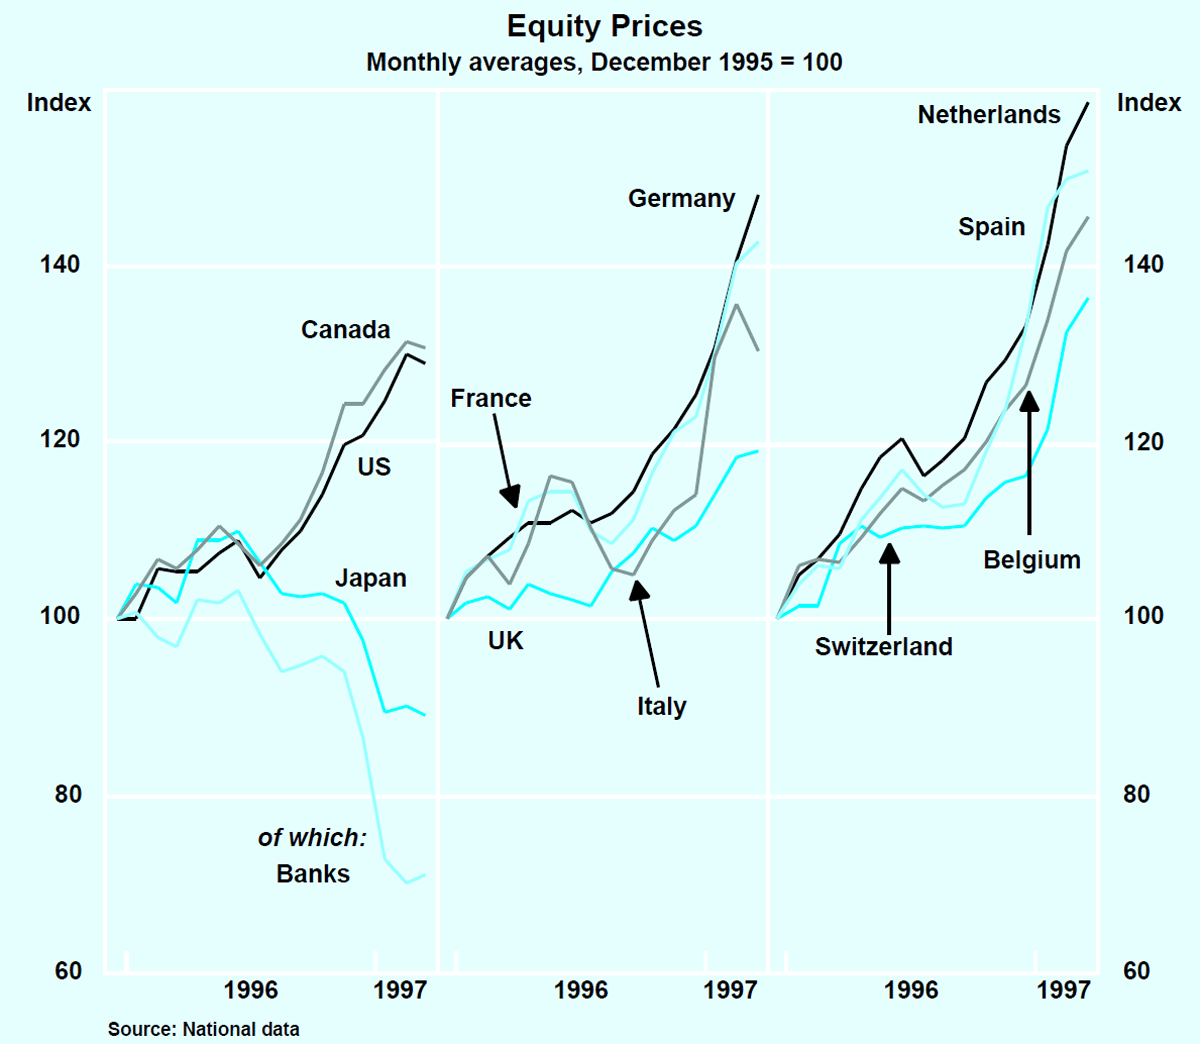 Graph 1: Equity Prices